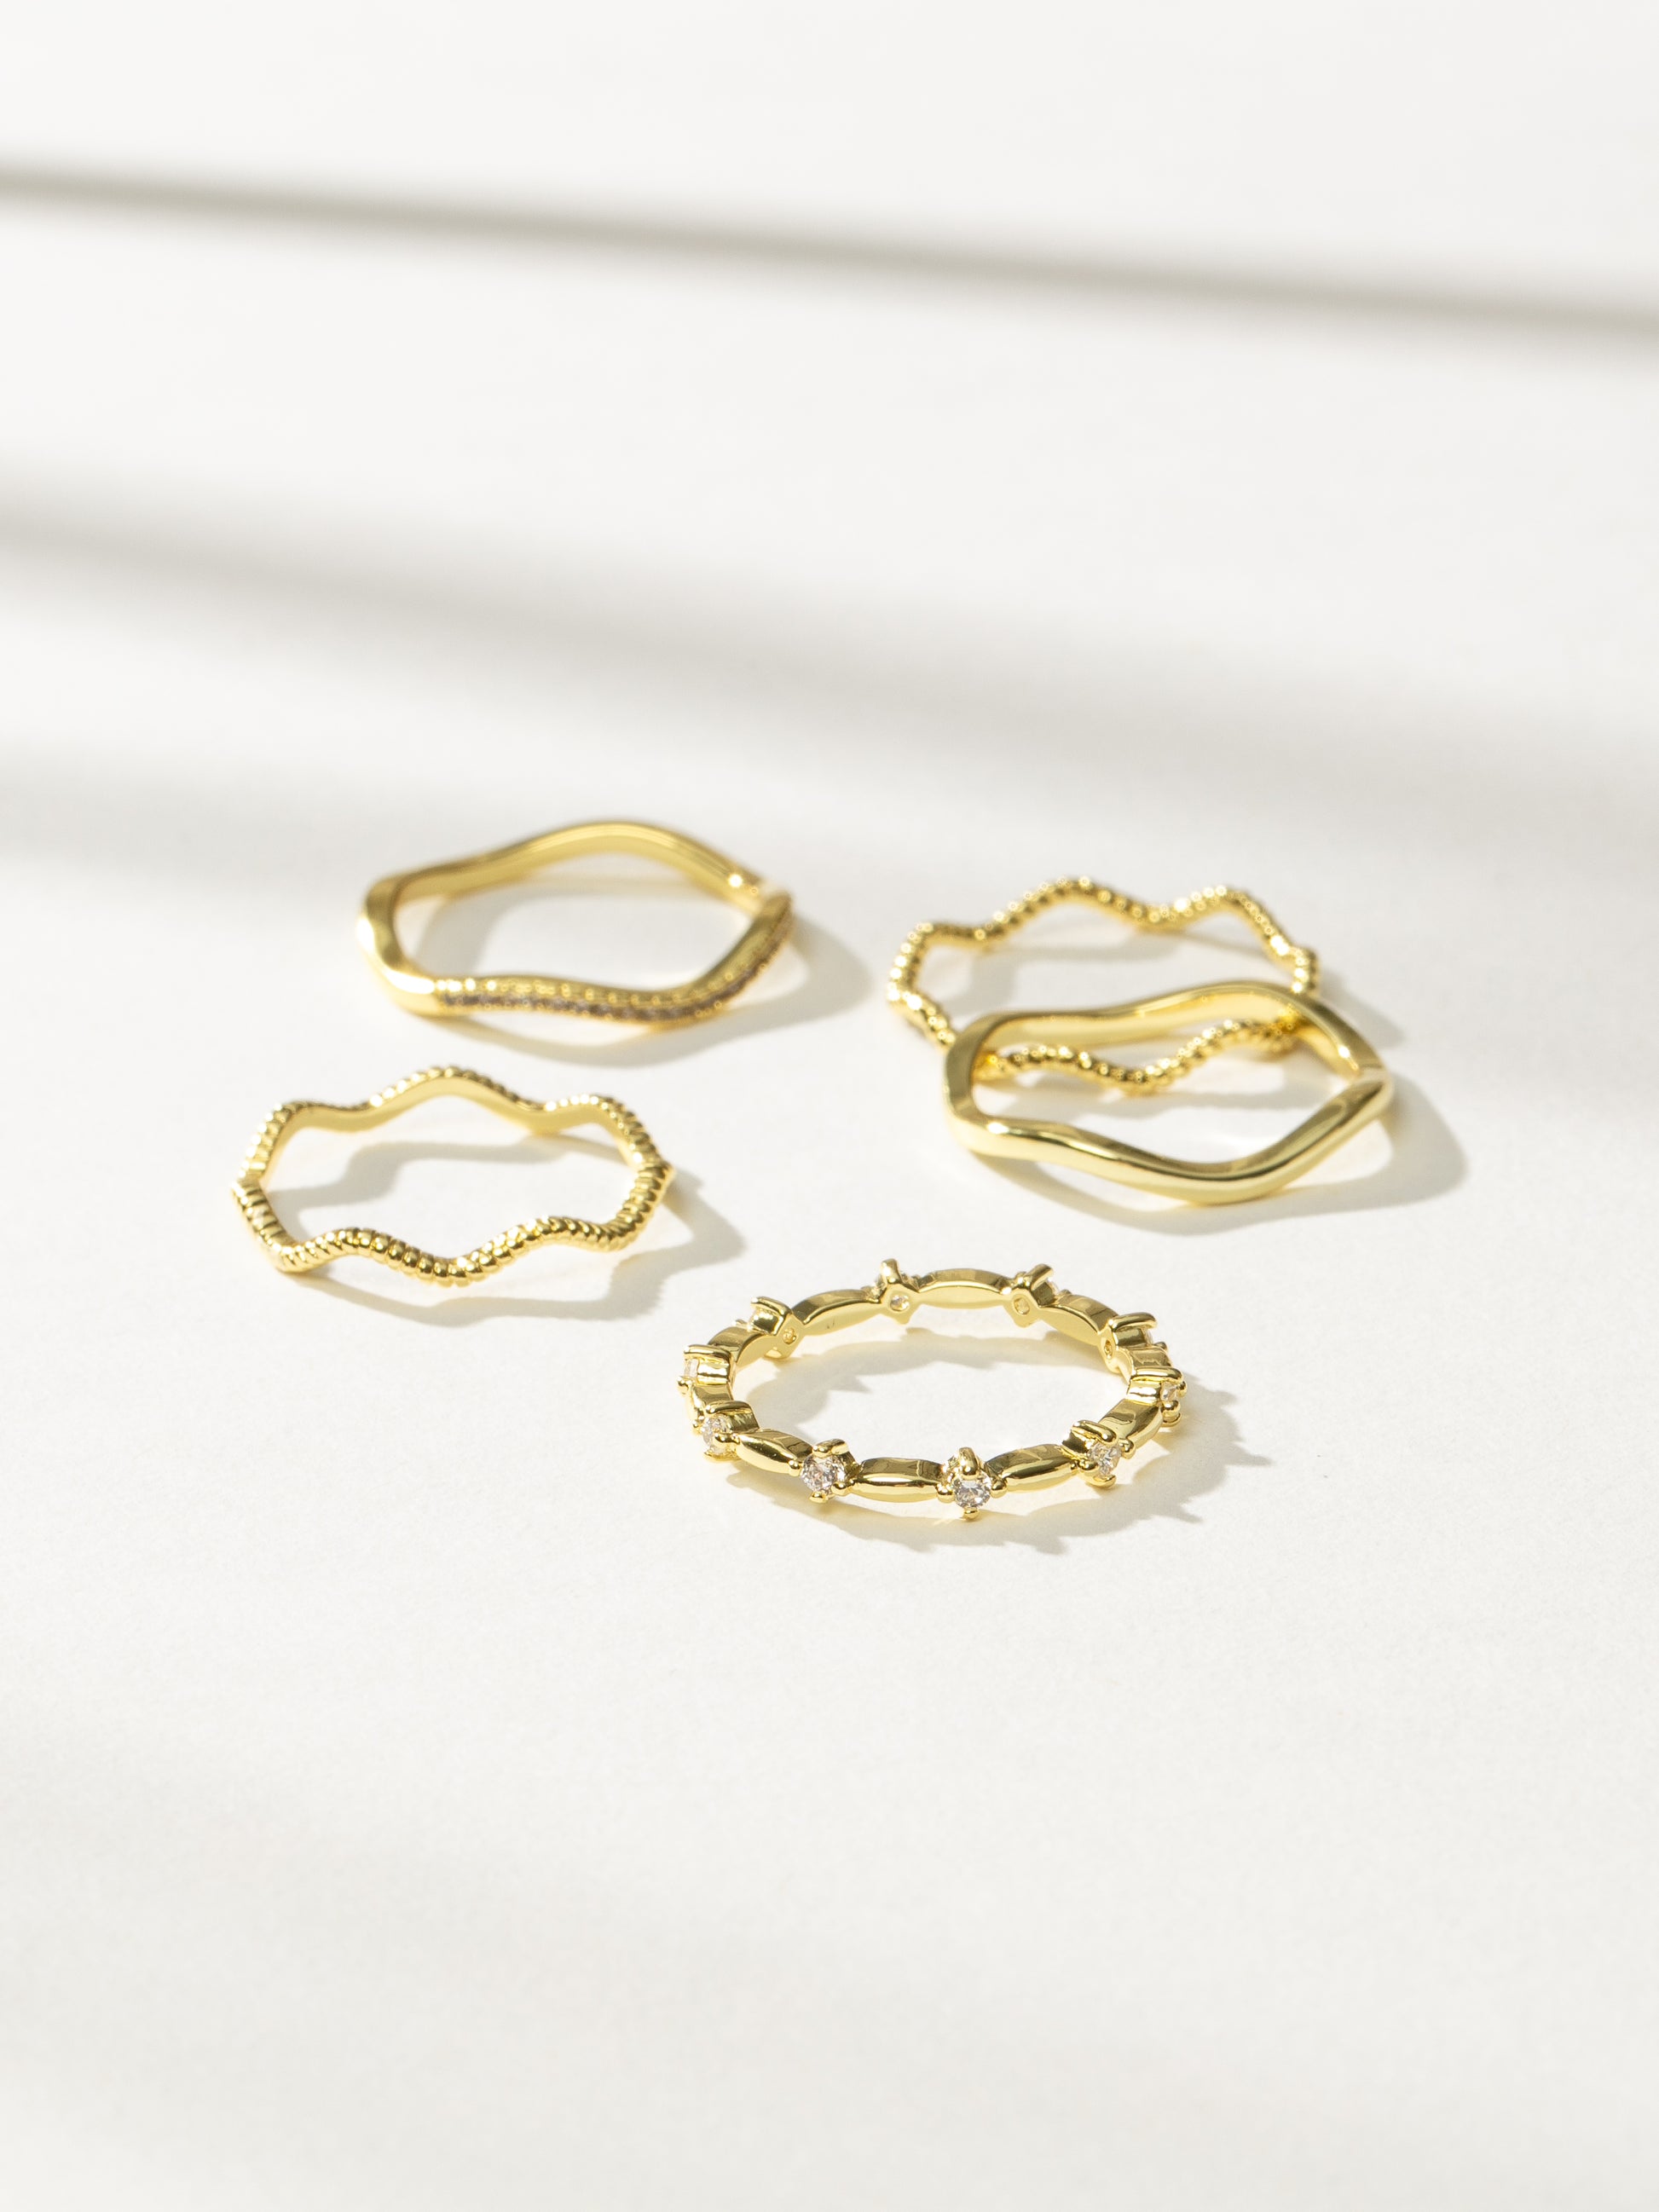 Vintage 5 Layered Ring Set | Gold | Product Image 2 | Uncommon James